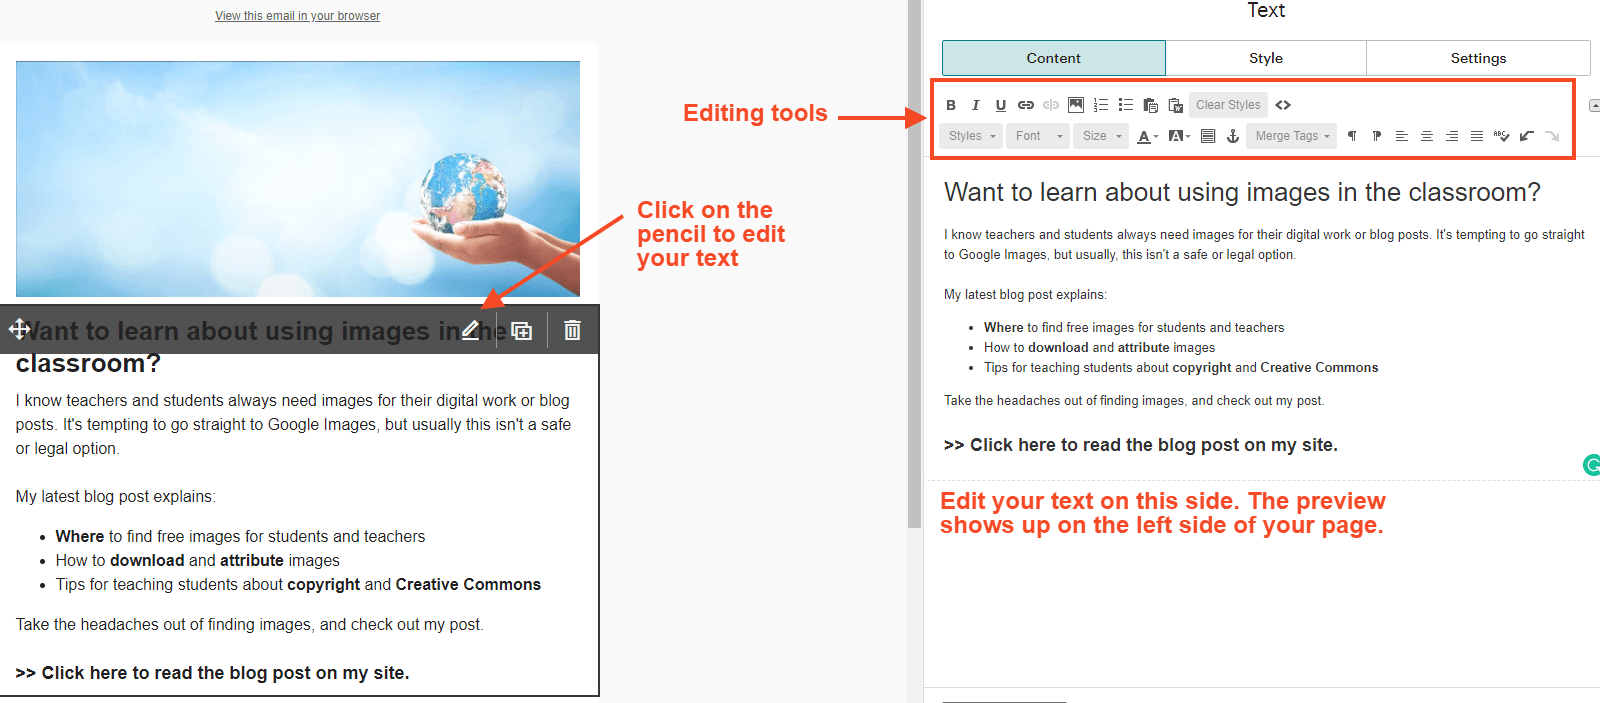 Screenshot showing how to edit text in Mailchimp